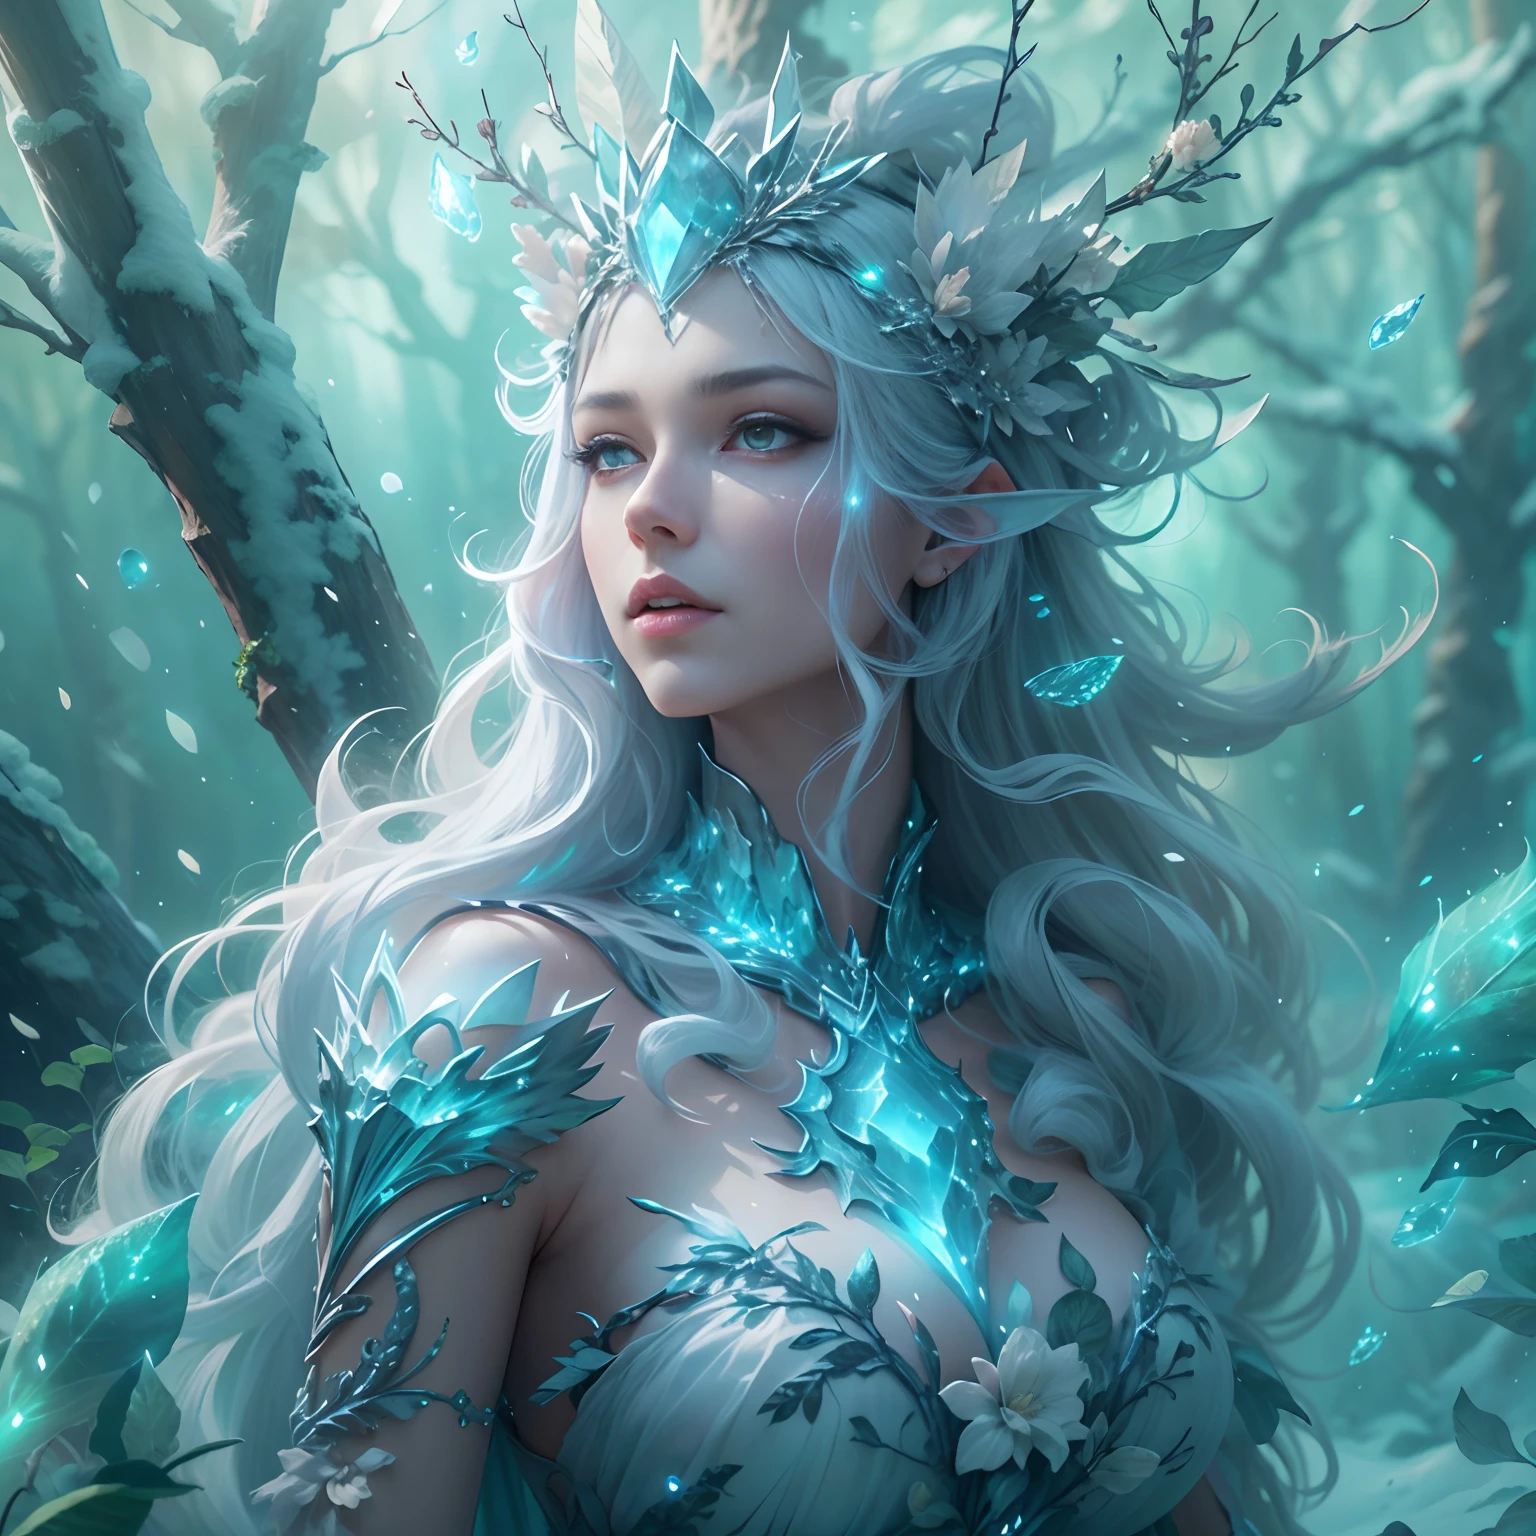 tmasterpiece，Best quality at best，high high quality，extremely detaile，8K，Fantastic snow and ice jungle， queen of ice and storm, goddess of winter，Colorful ice magic，glowing sprites，Natural elements in the forest theme，Colorful snow and ice jungle，Epic fantasy art style，Delicate leaves and branches are surrounded by fireflies（nature elements），（Jungle theme），（Foliage），（tree branch），（glowworm），（Particle effect）and other 3D， Octane rendering，Ray traching，Super meticulous，Depicting the harmony between man and nature, Epic fantasy art style, Epic fantasy art style HD, Epic fantasy digital art style, by Yang J, trending on artstation pixiv, Winter queen, Anime fantasy illustration, beautiful ancient frost witch, Arte conceitual de inverno, ice sorceress